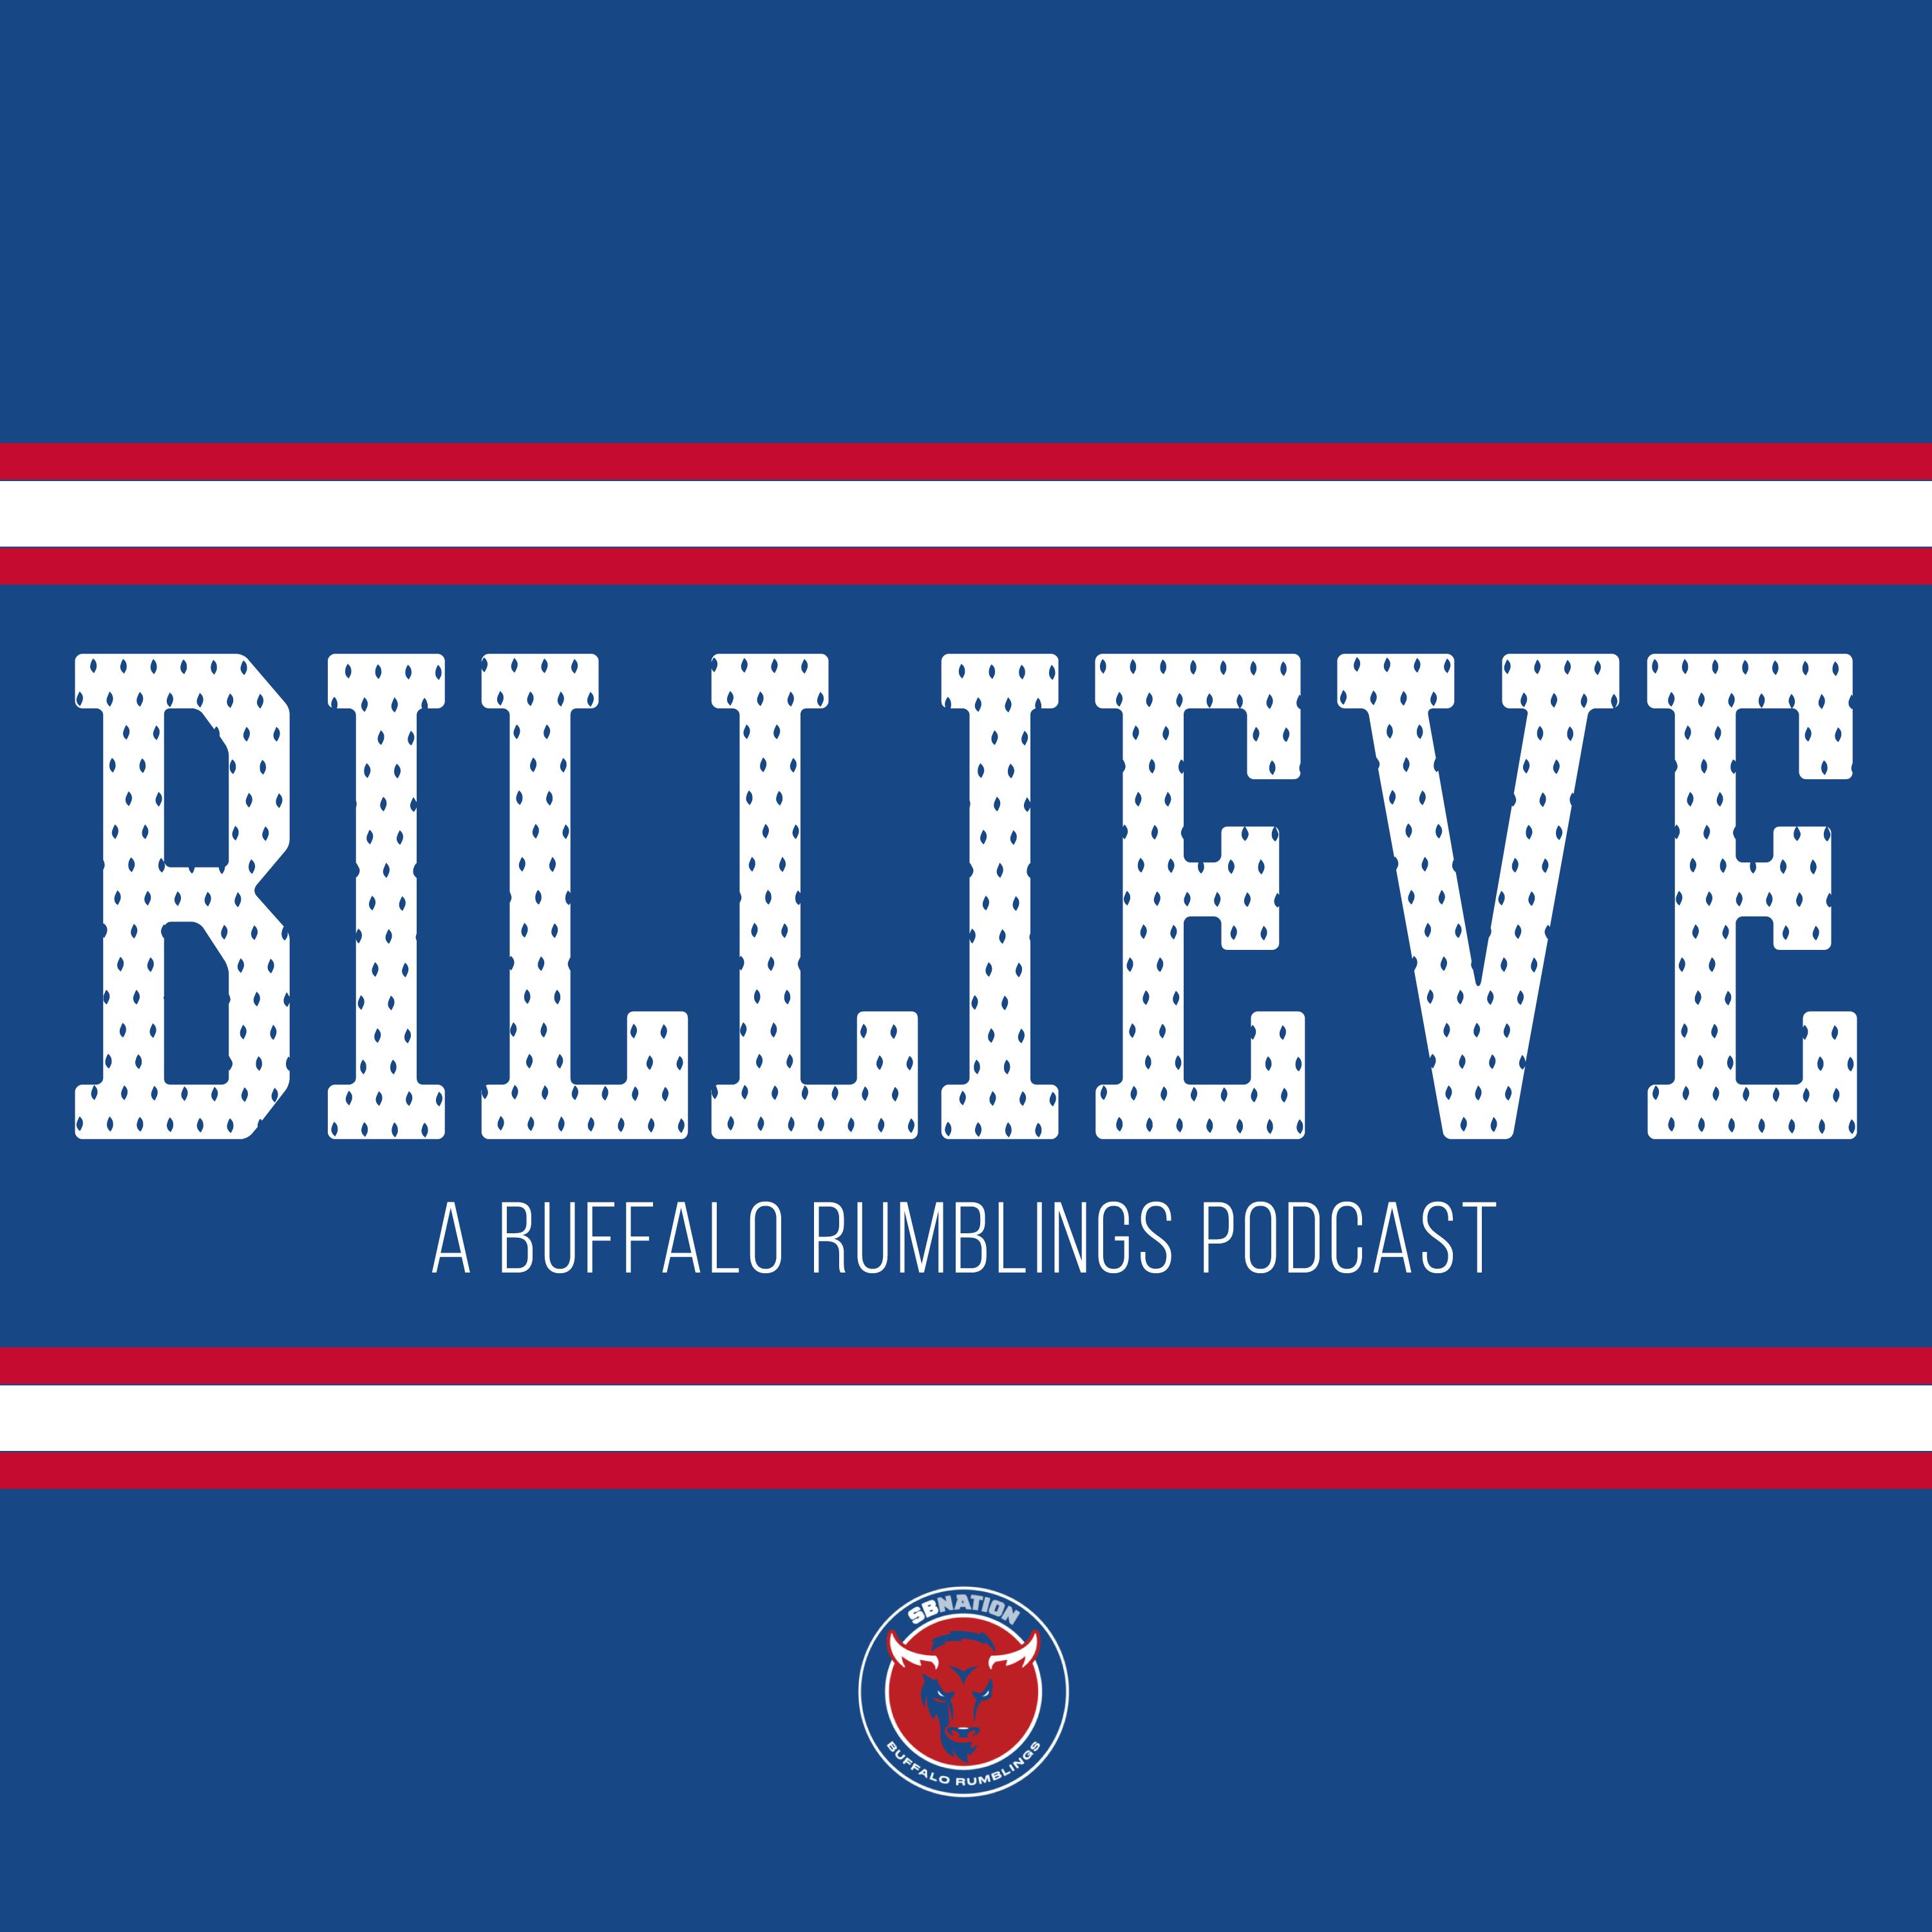 Billieve: What to Make of Buffalo's Loss to the Ravens